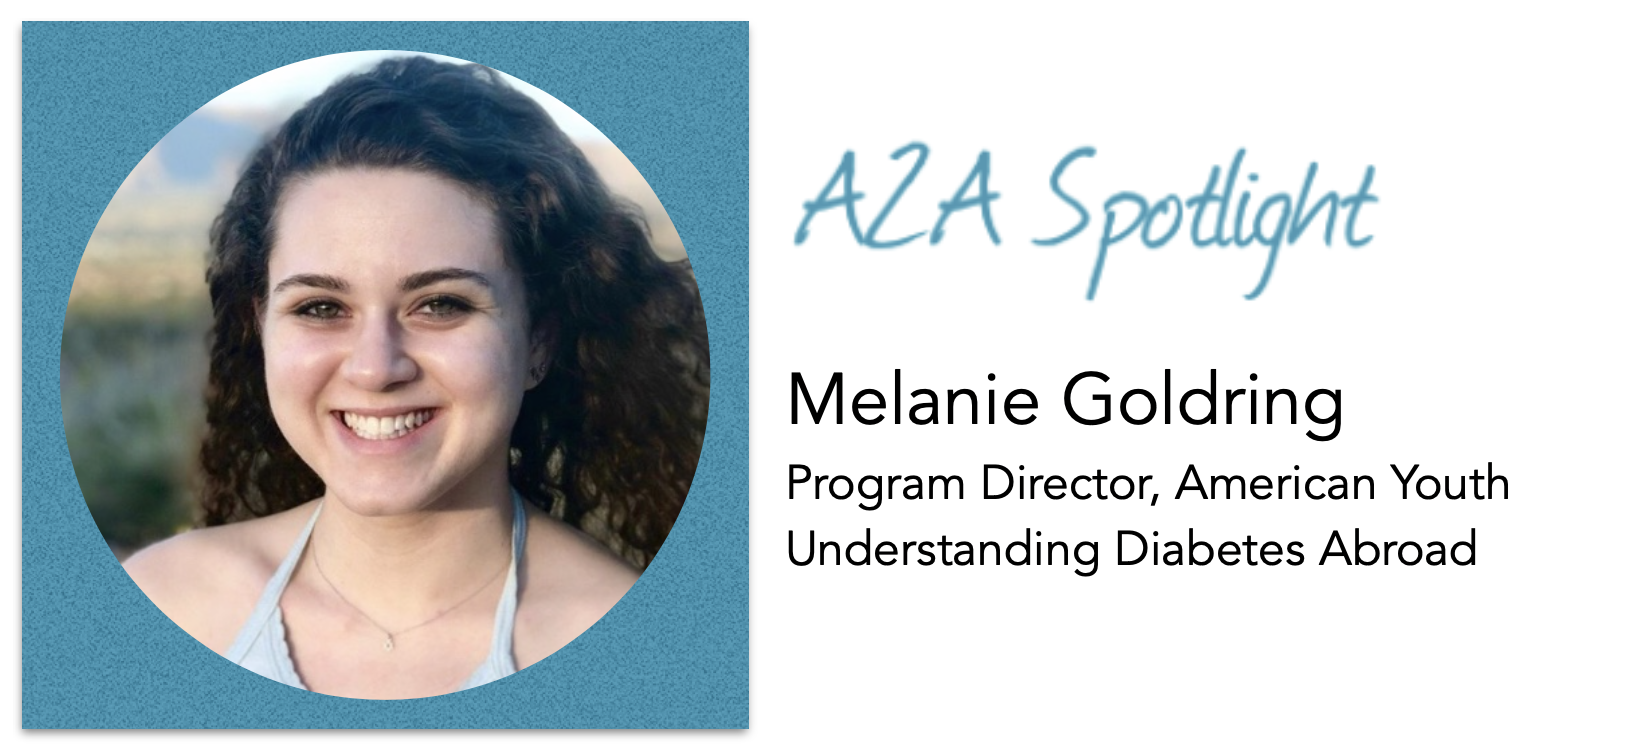 Melanie Goldring Helps Empower Young Diabetics Across The World